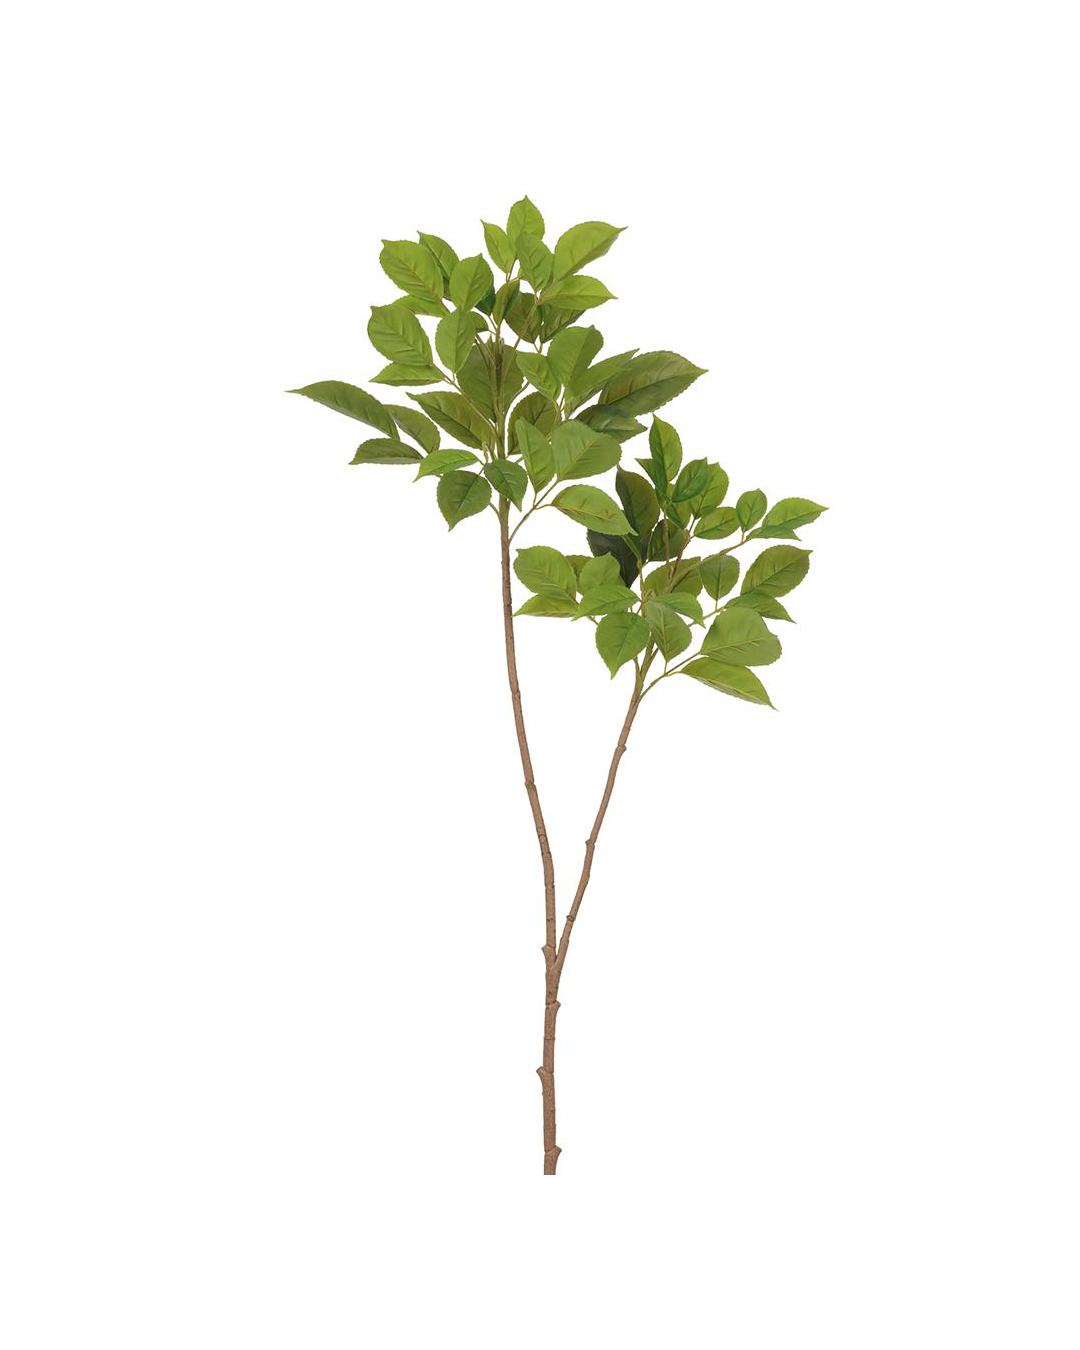 A young tree with a slender brown trunk and vibrant green leaves, isolated against the plain white background of a Scottsdale, Arizona bungalow. AllState Floral And Craft's 41.5" Green Bishop Wood Branch.